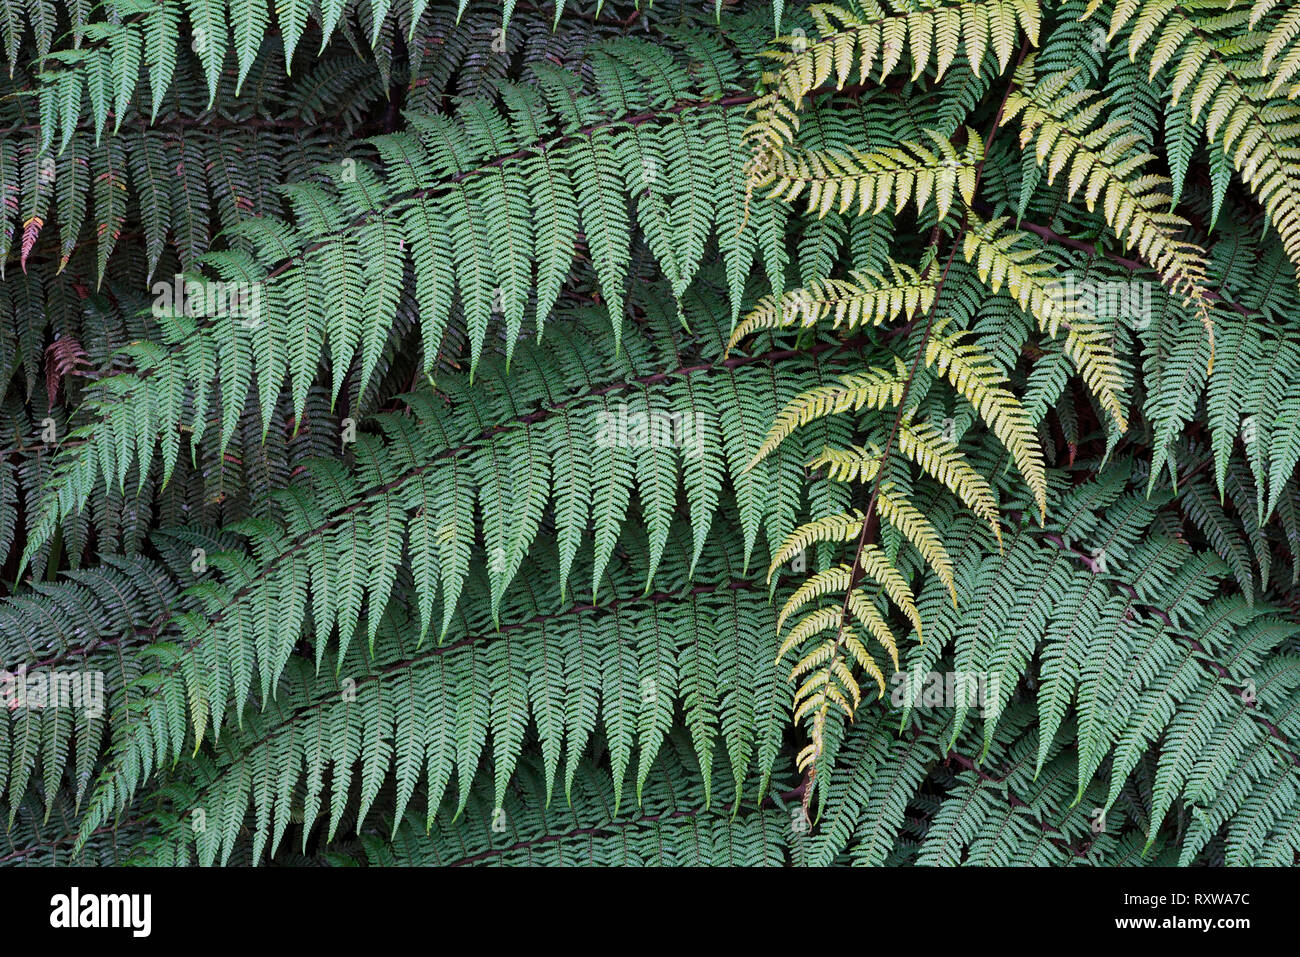 Tree Fern (Cyatheaceae) at the Bellavista Cloud Forest Lodge in Ecuador. The younger fronds overlying the older ones feature lighter shades of green. Stock Photo